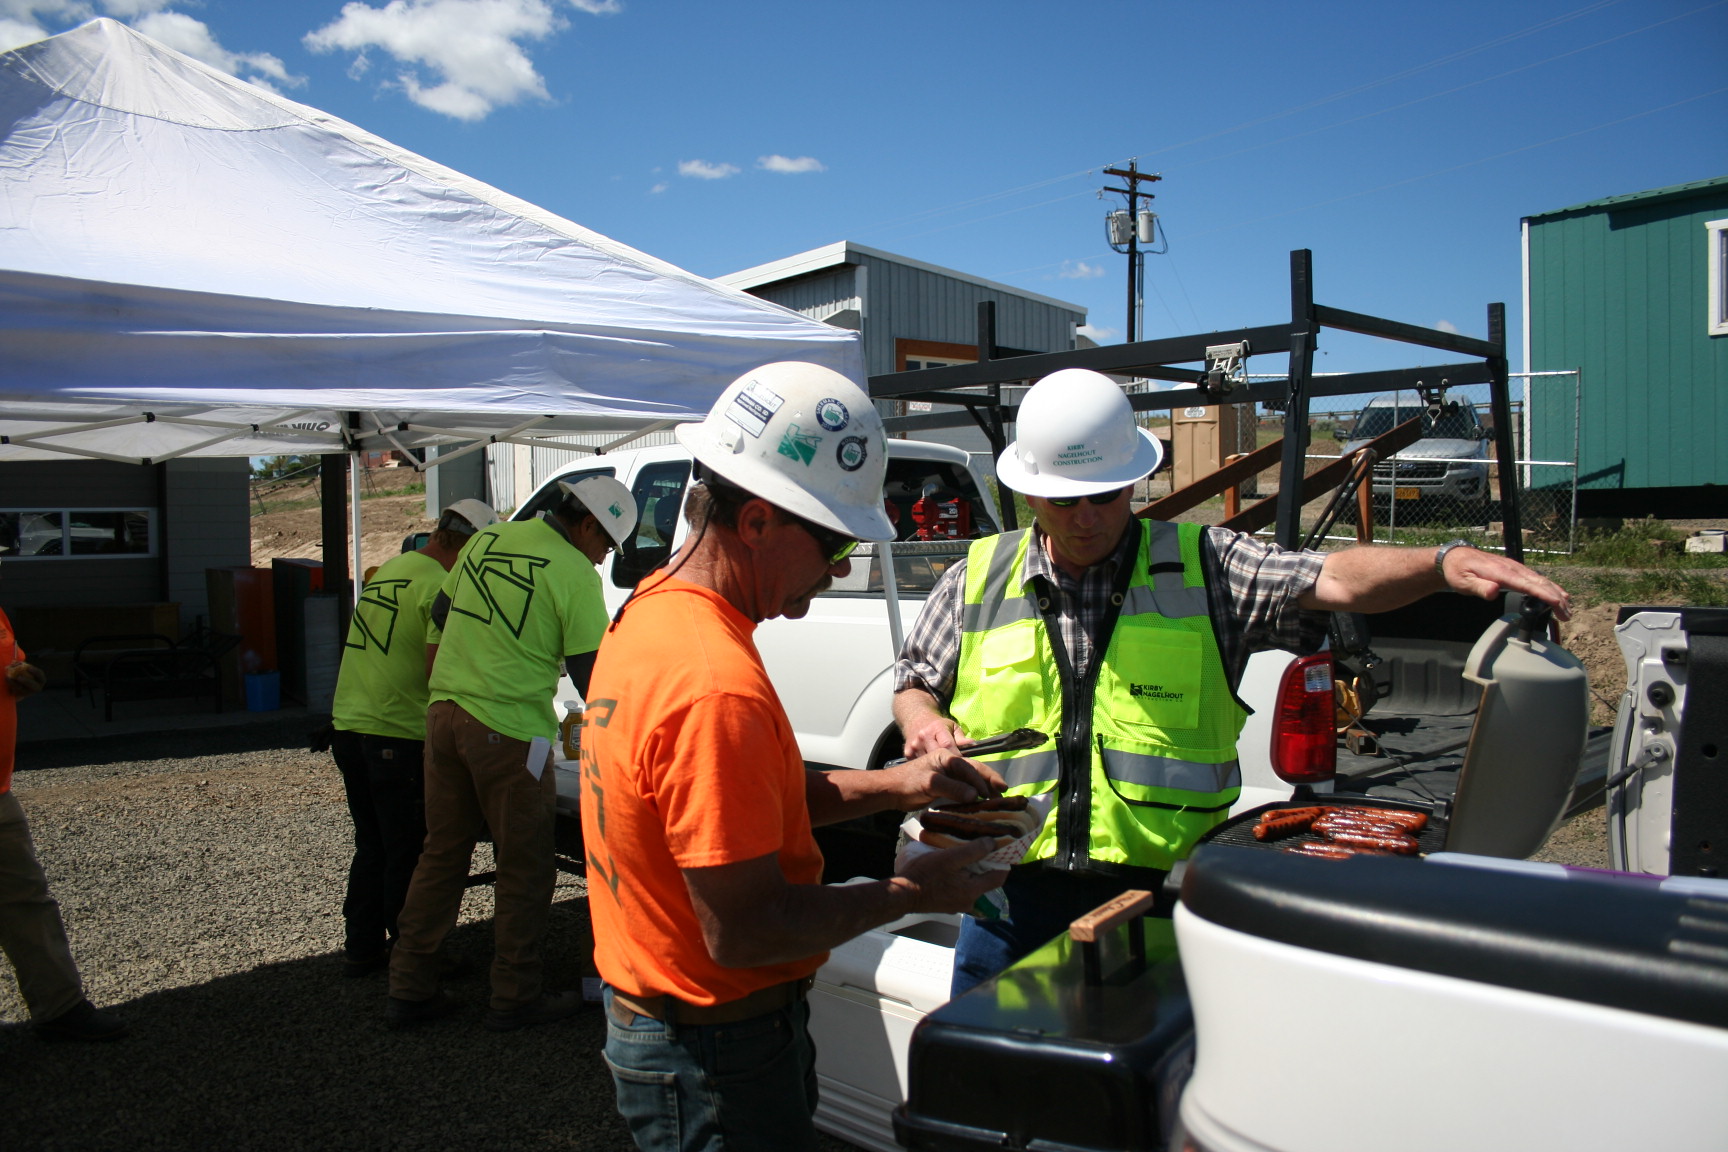 Men in hard hats and safety vests standing next to a barbeque on a truck tailgate